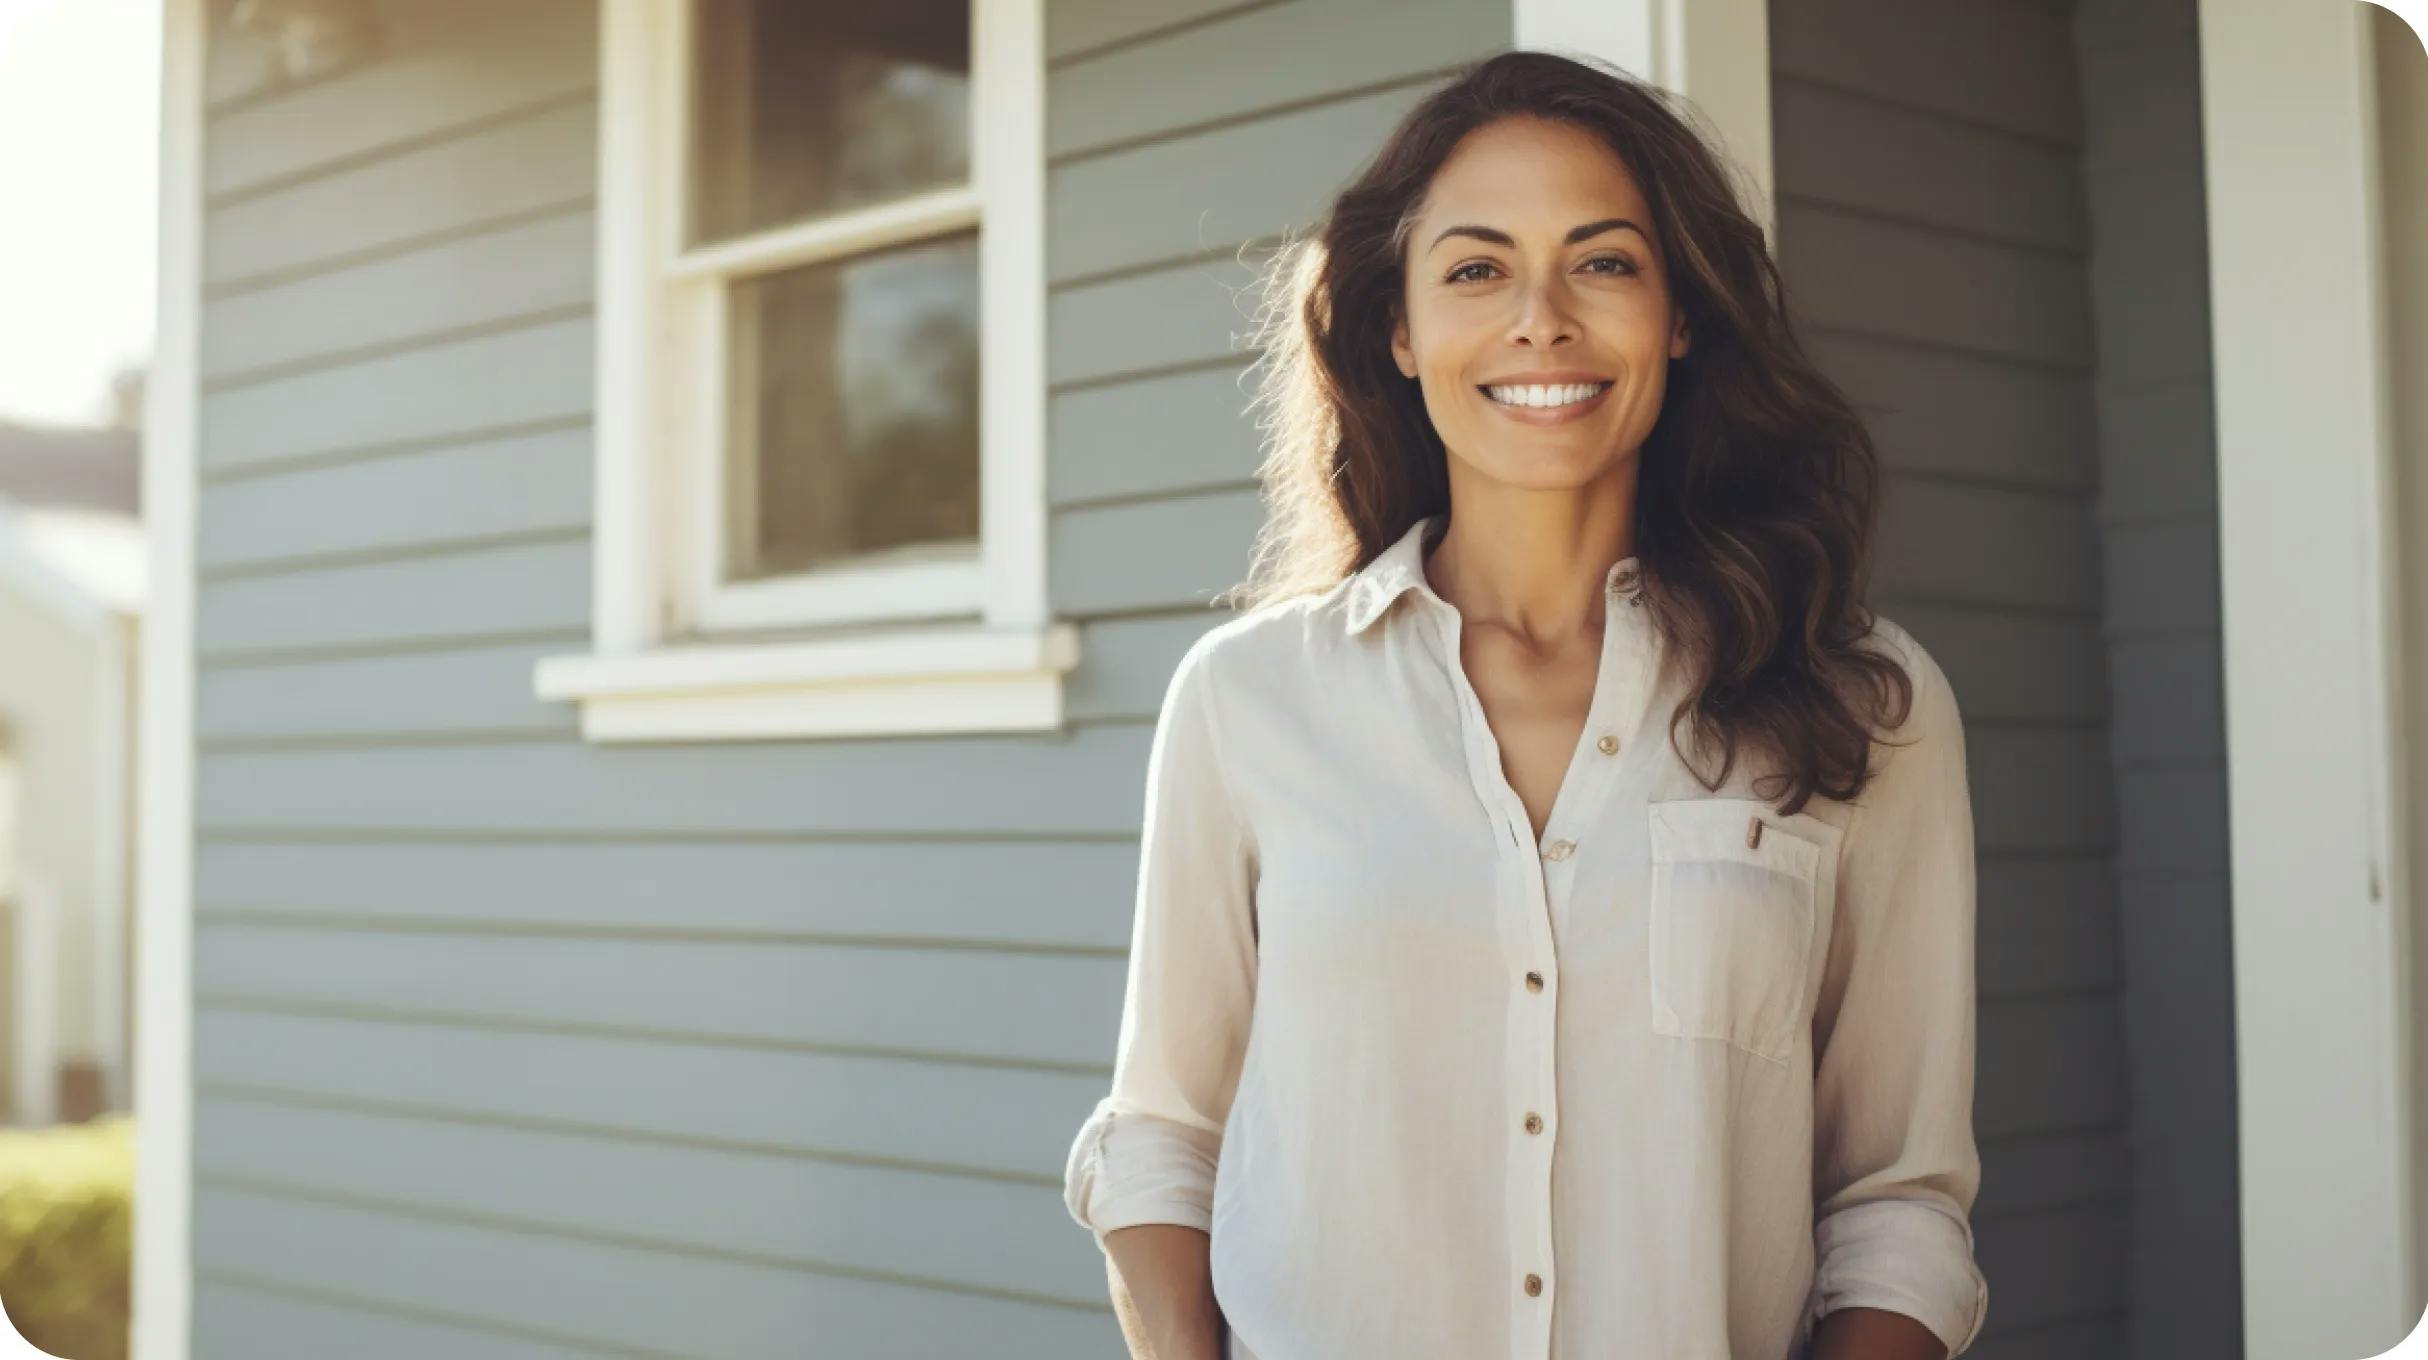 A real estate agent - woman - standing in front of a house